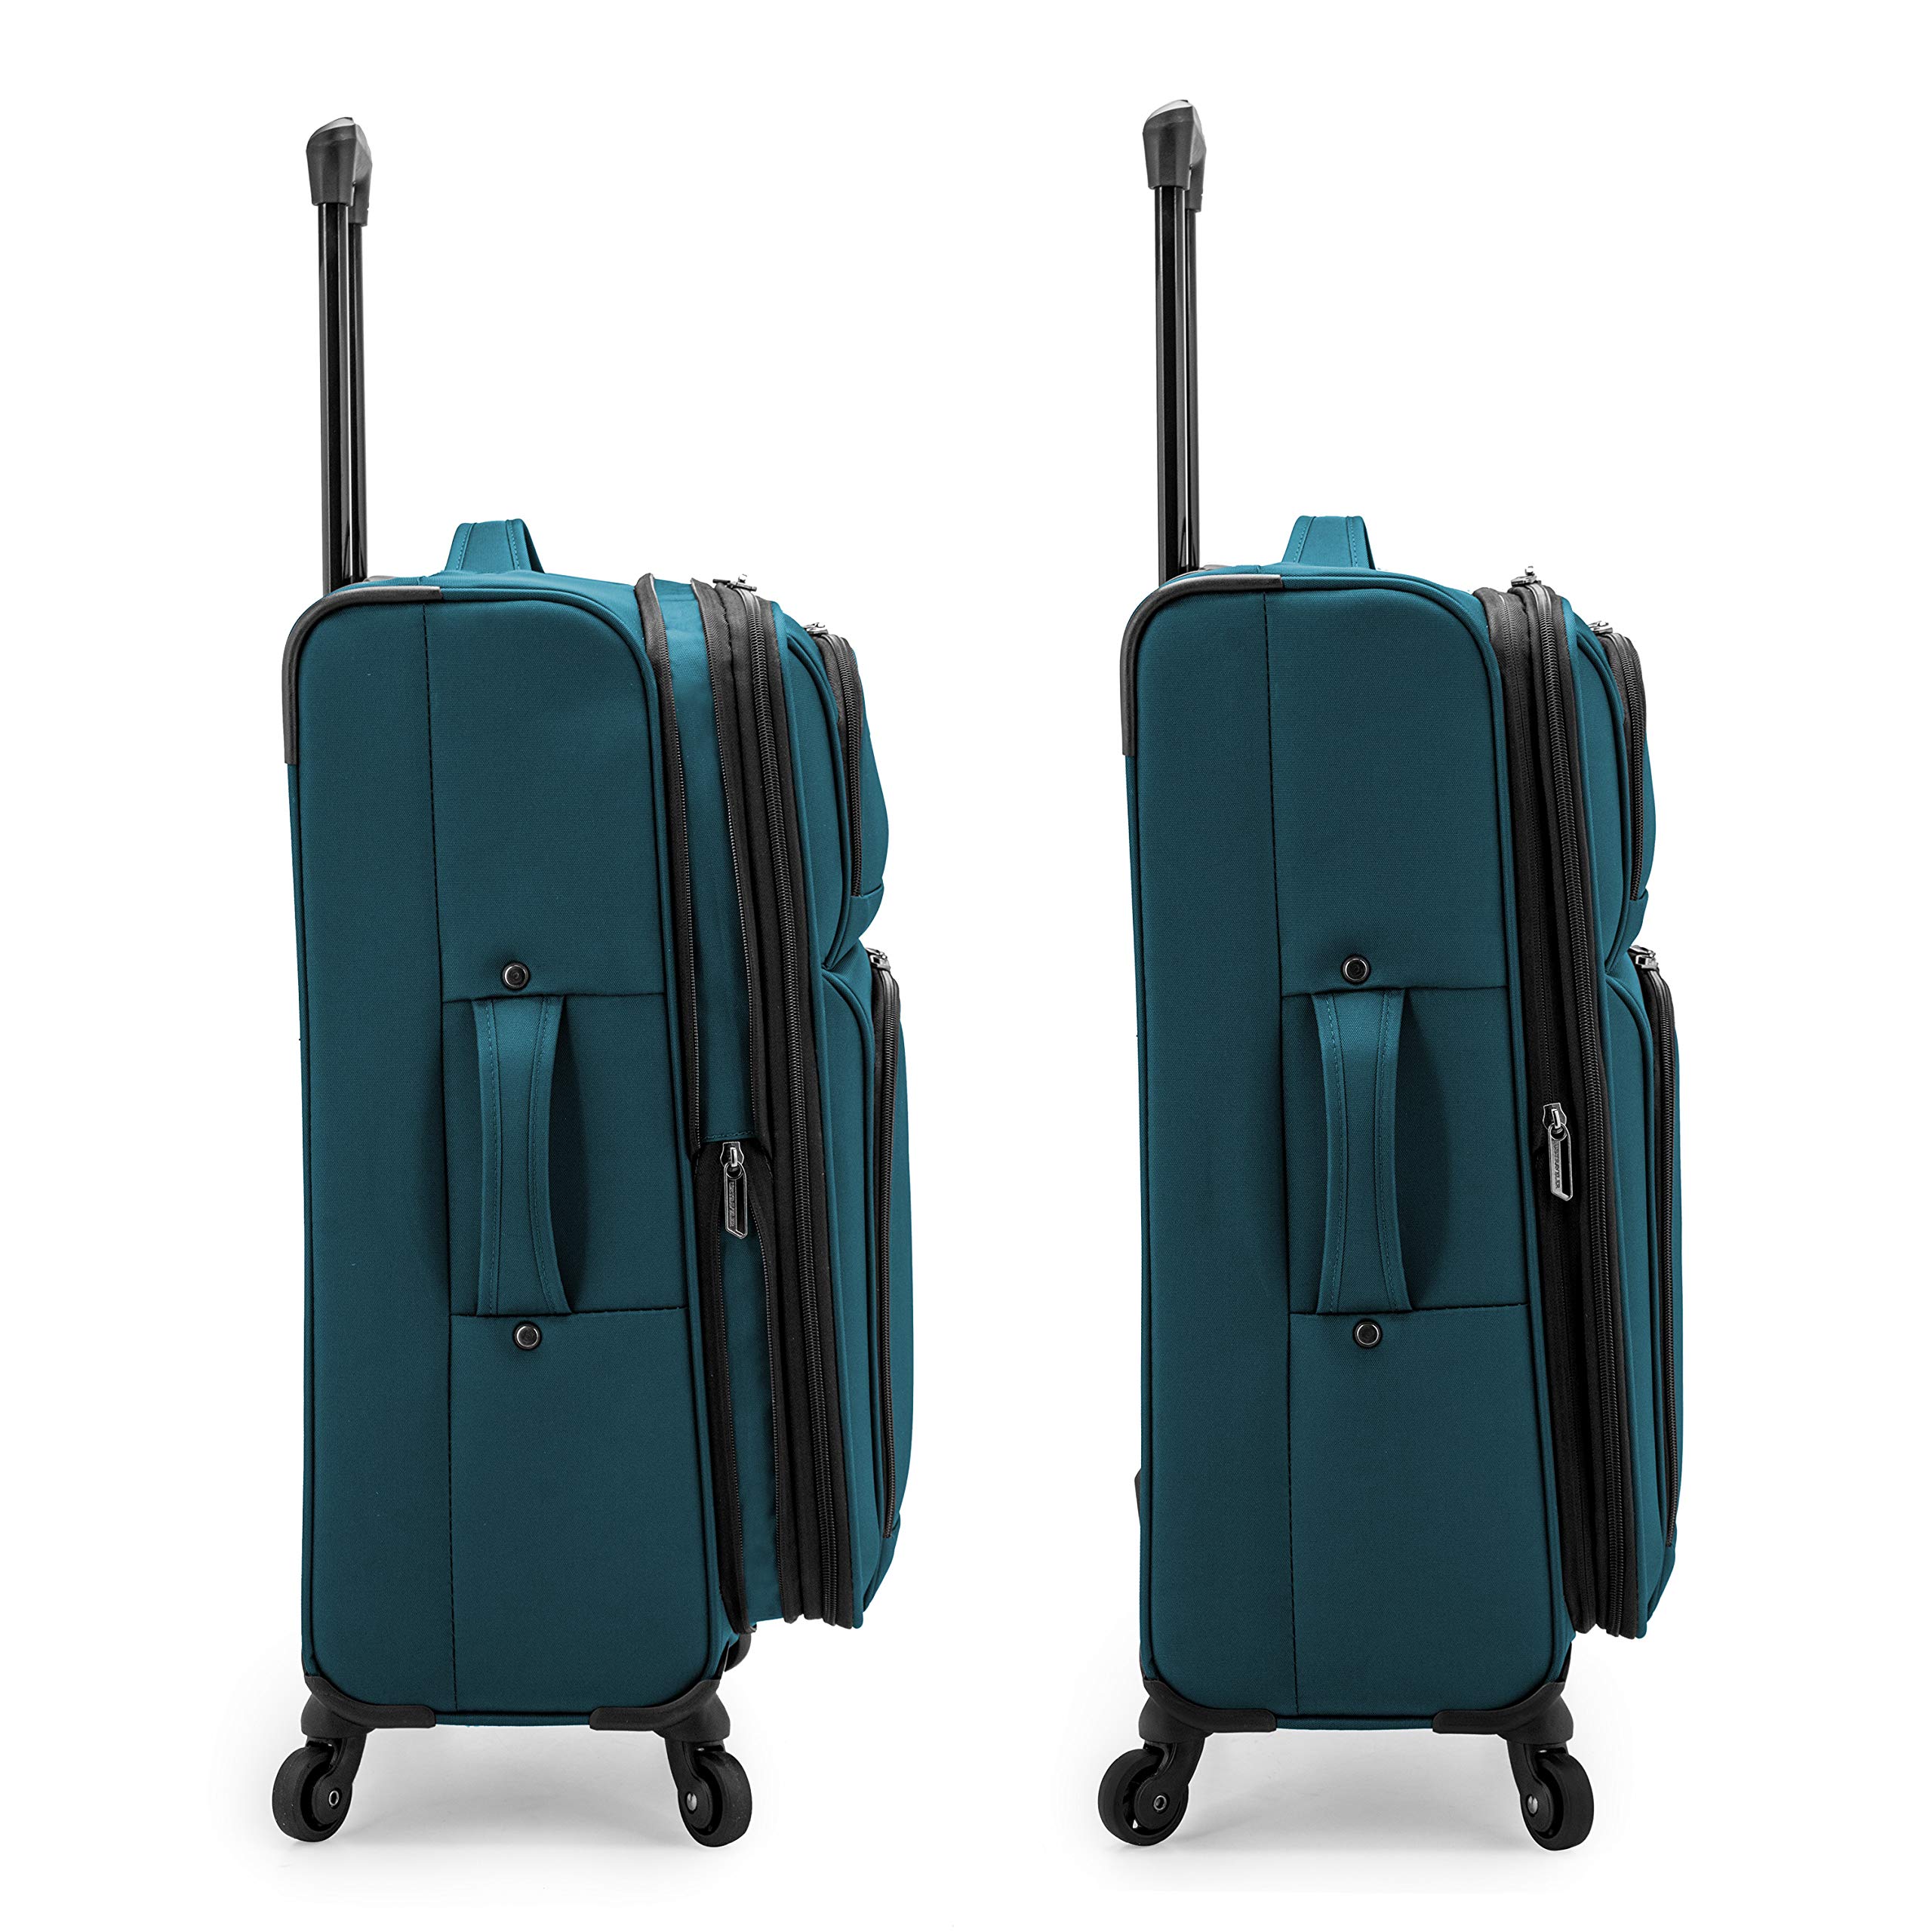 U.S. Traveler Anzio Softside Expandable Spinner Luggage, Teal, Checked-Medium 26-Inch